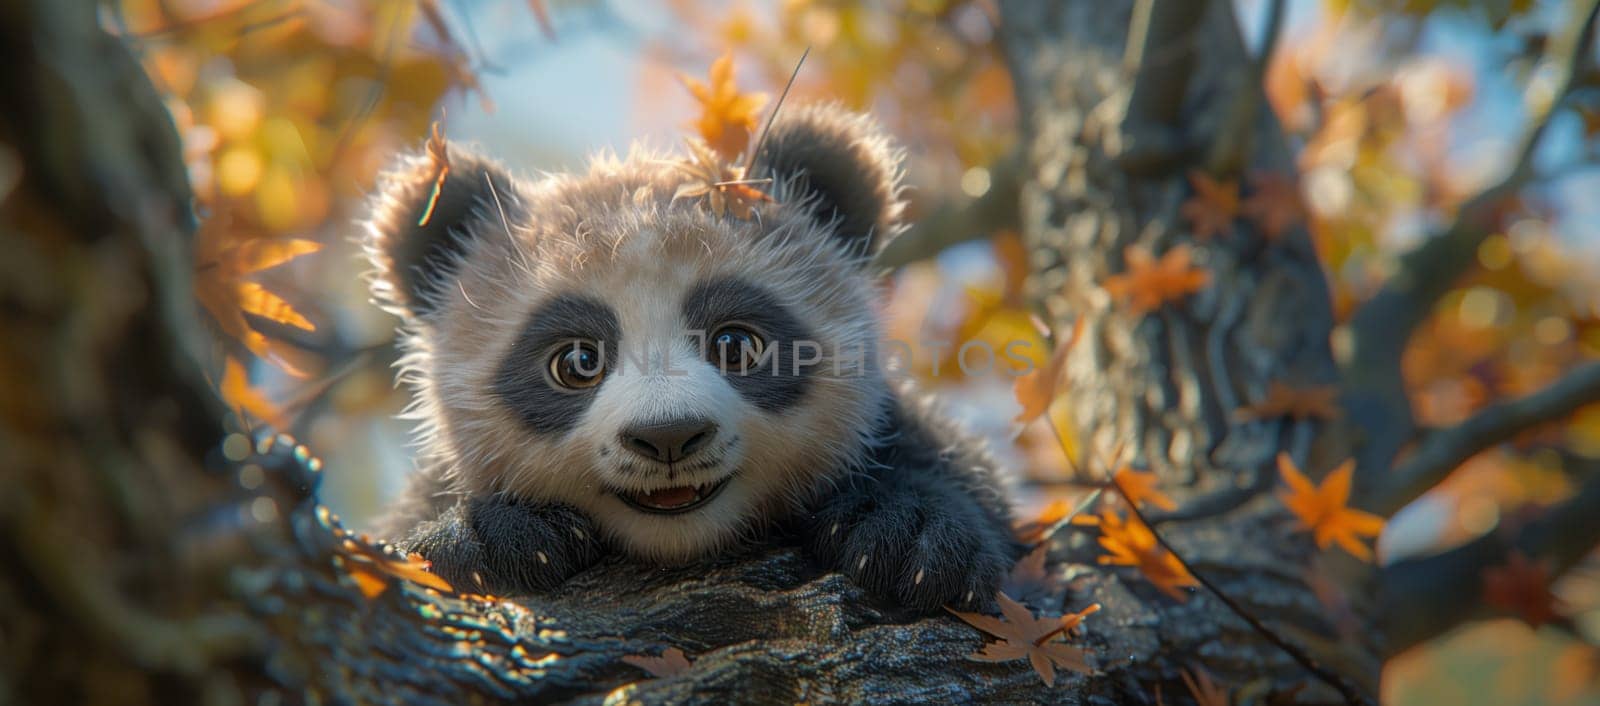 A carnivore, the panda bear is perched on a tree branch in a natural landscape. Its whiskers stand out against the green grass below, resembling a work of art